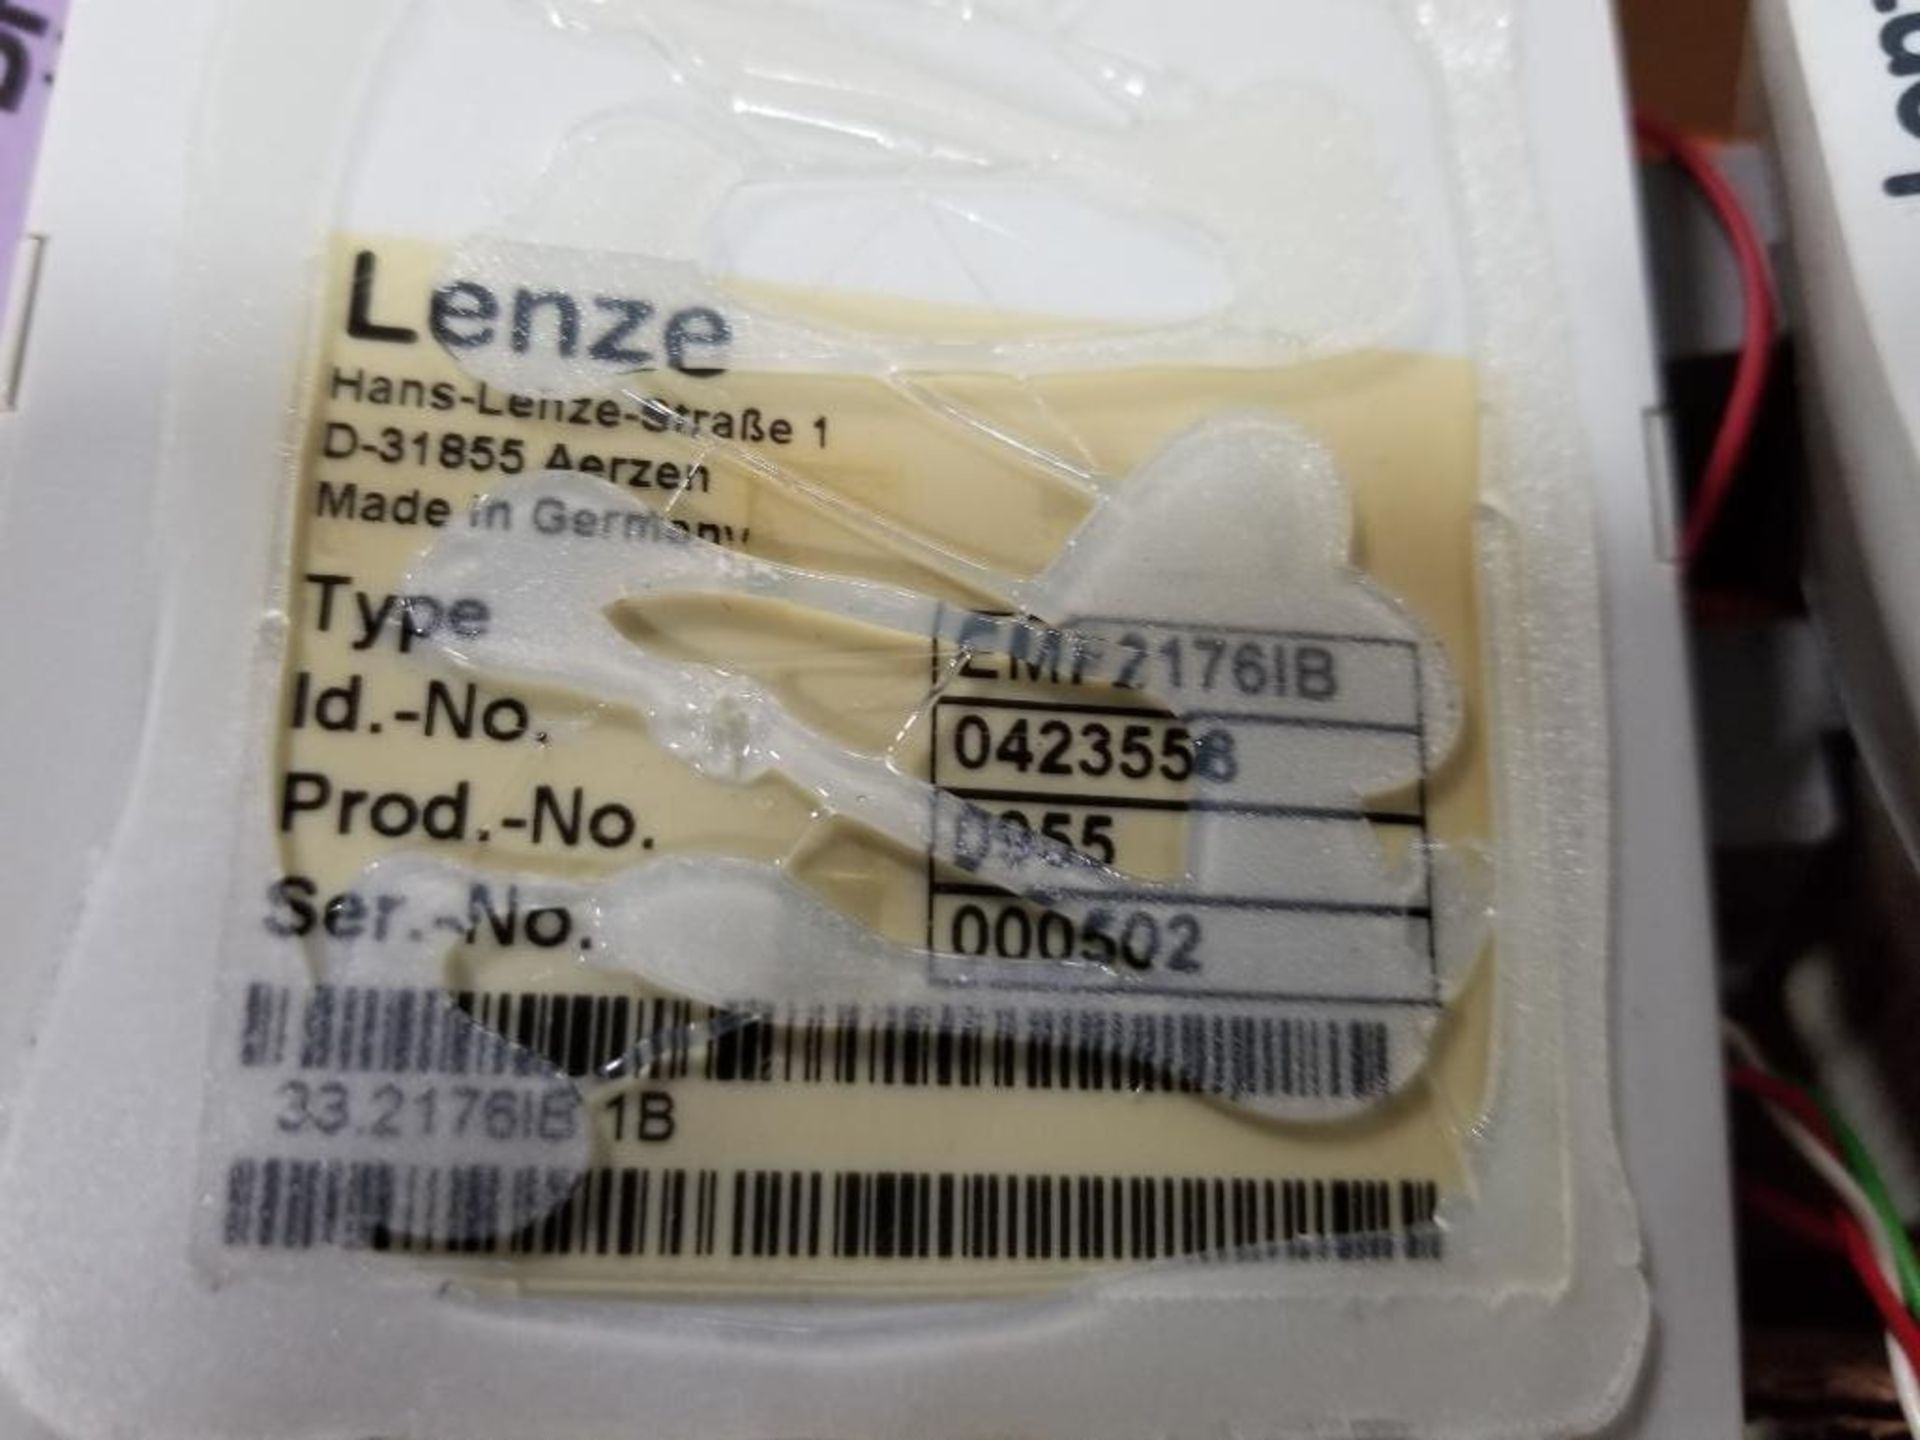 Lenze Extension board 01. 417468 TYPE: EPZ-10201. Drive PLC 459576. - Image 6 of 6